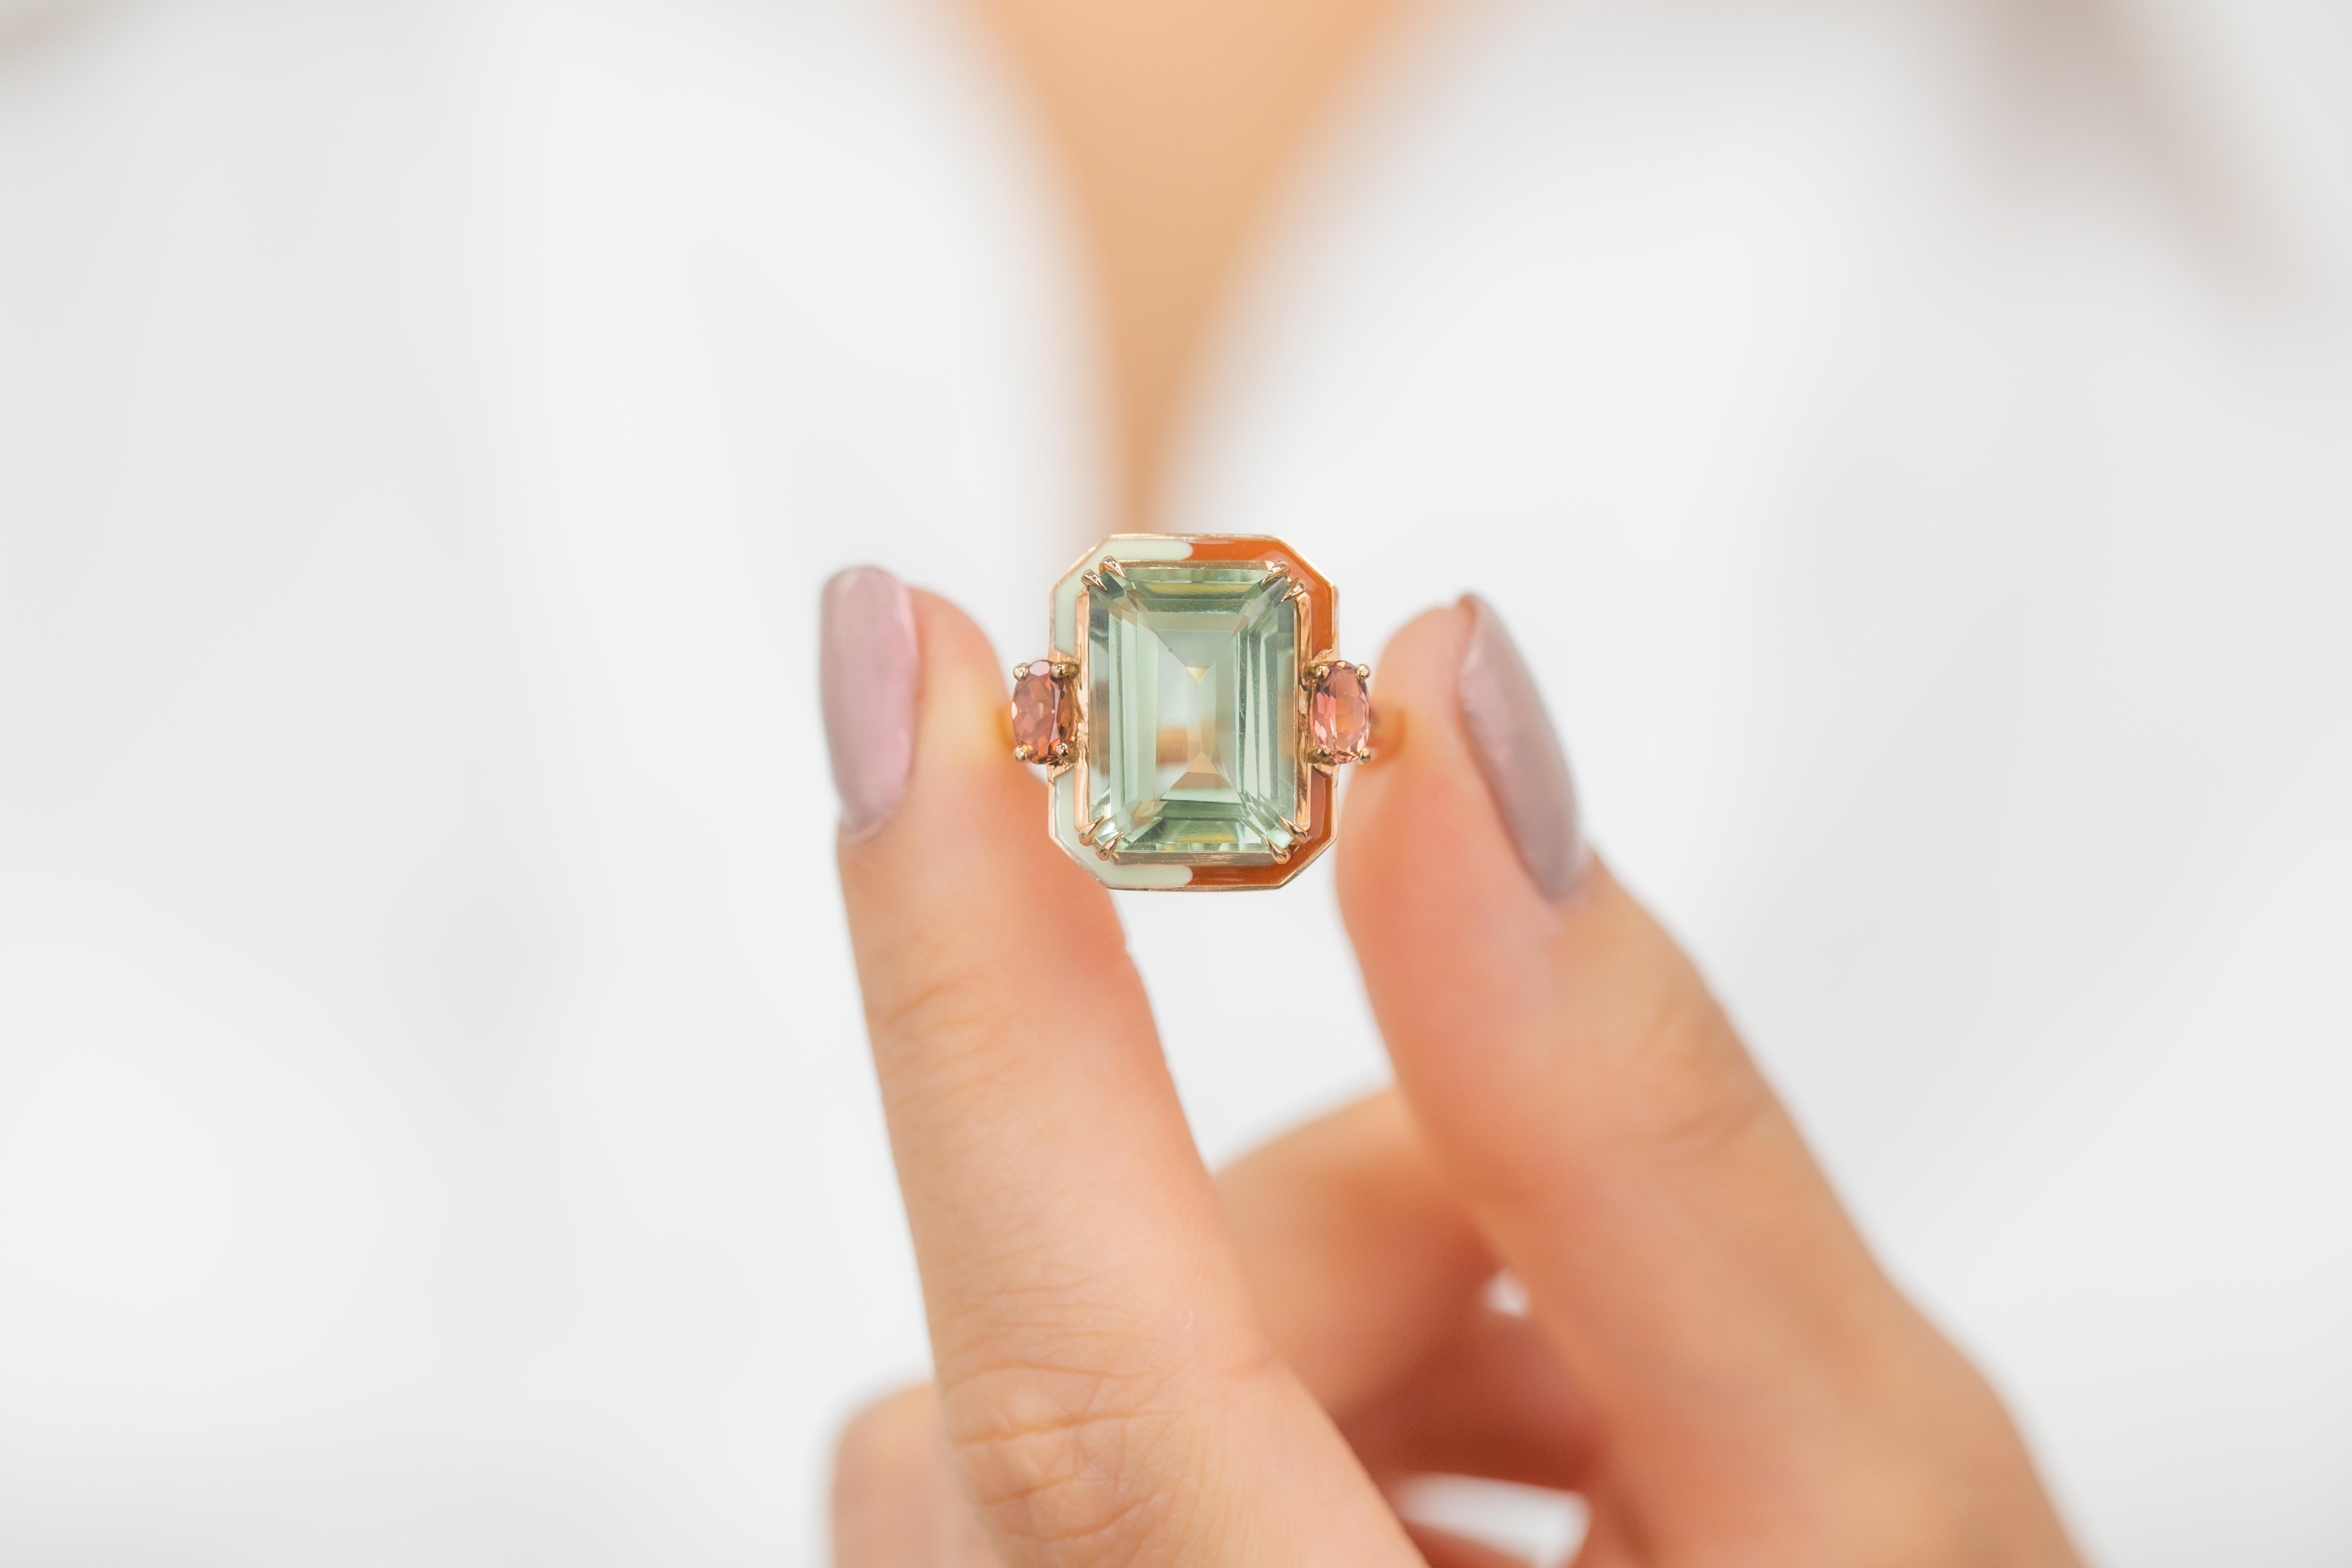 For Sale:  Artdeco Style Ring, 14k Solid Gold, Green Amethyst and Pink Tourmaline Stone Ring 8